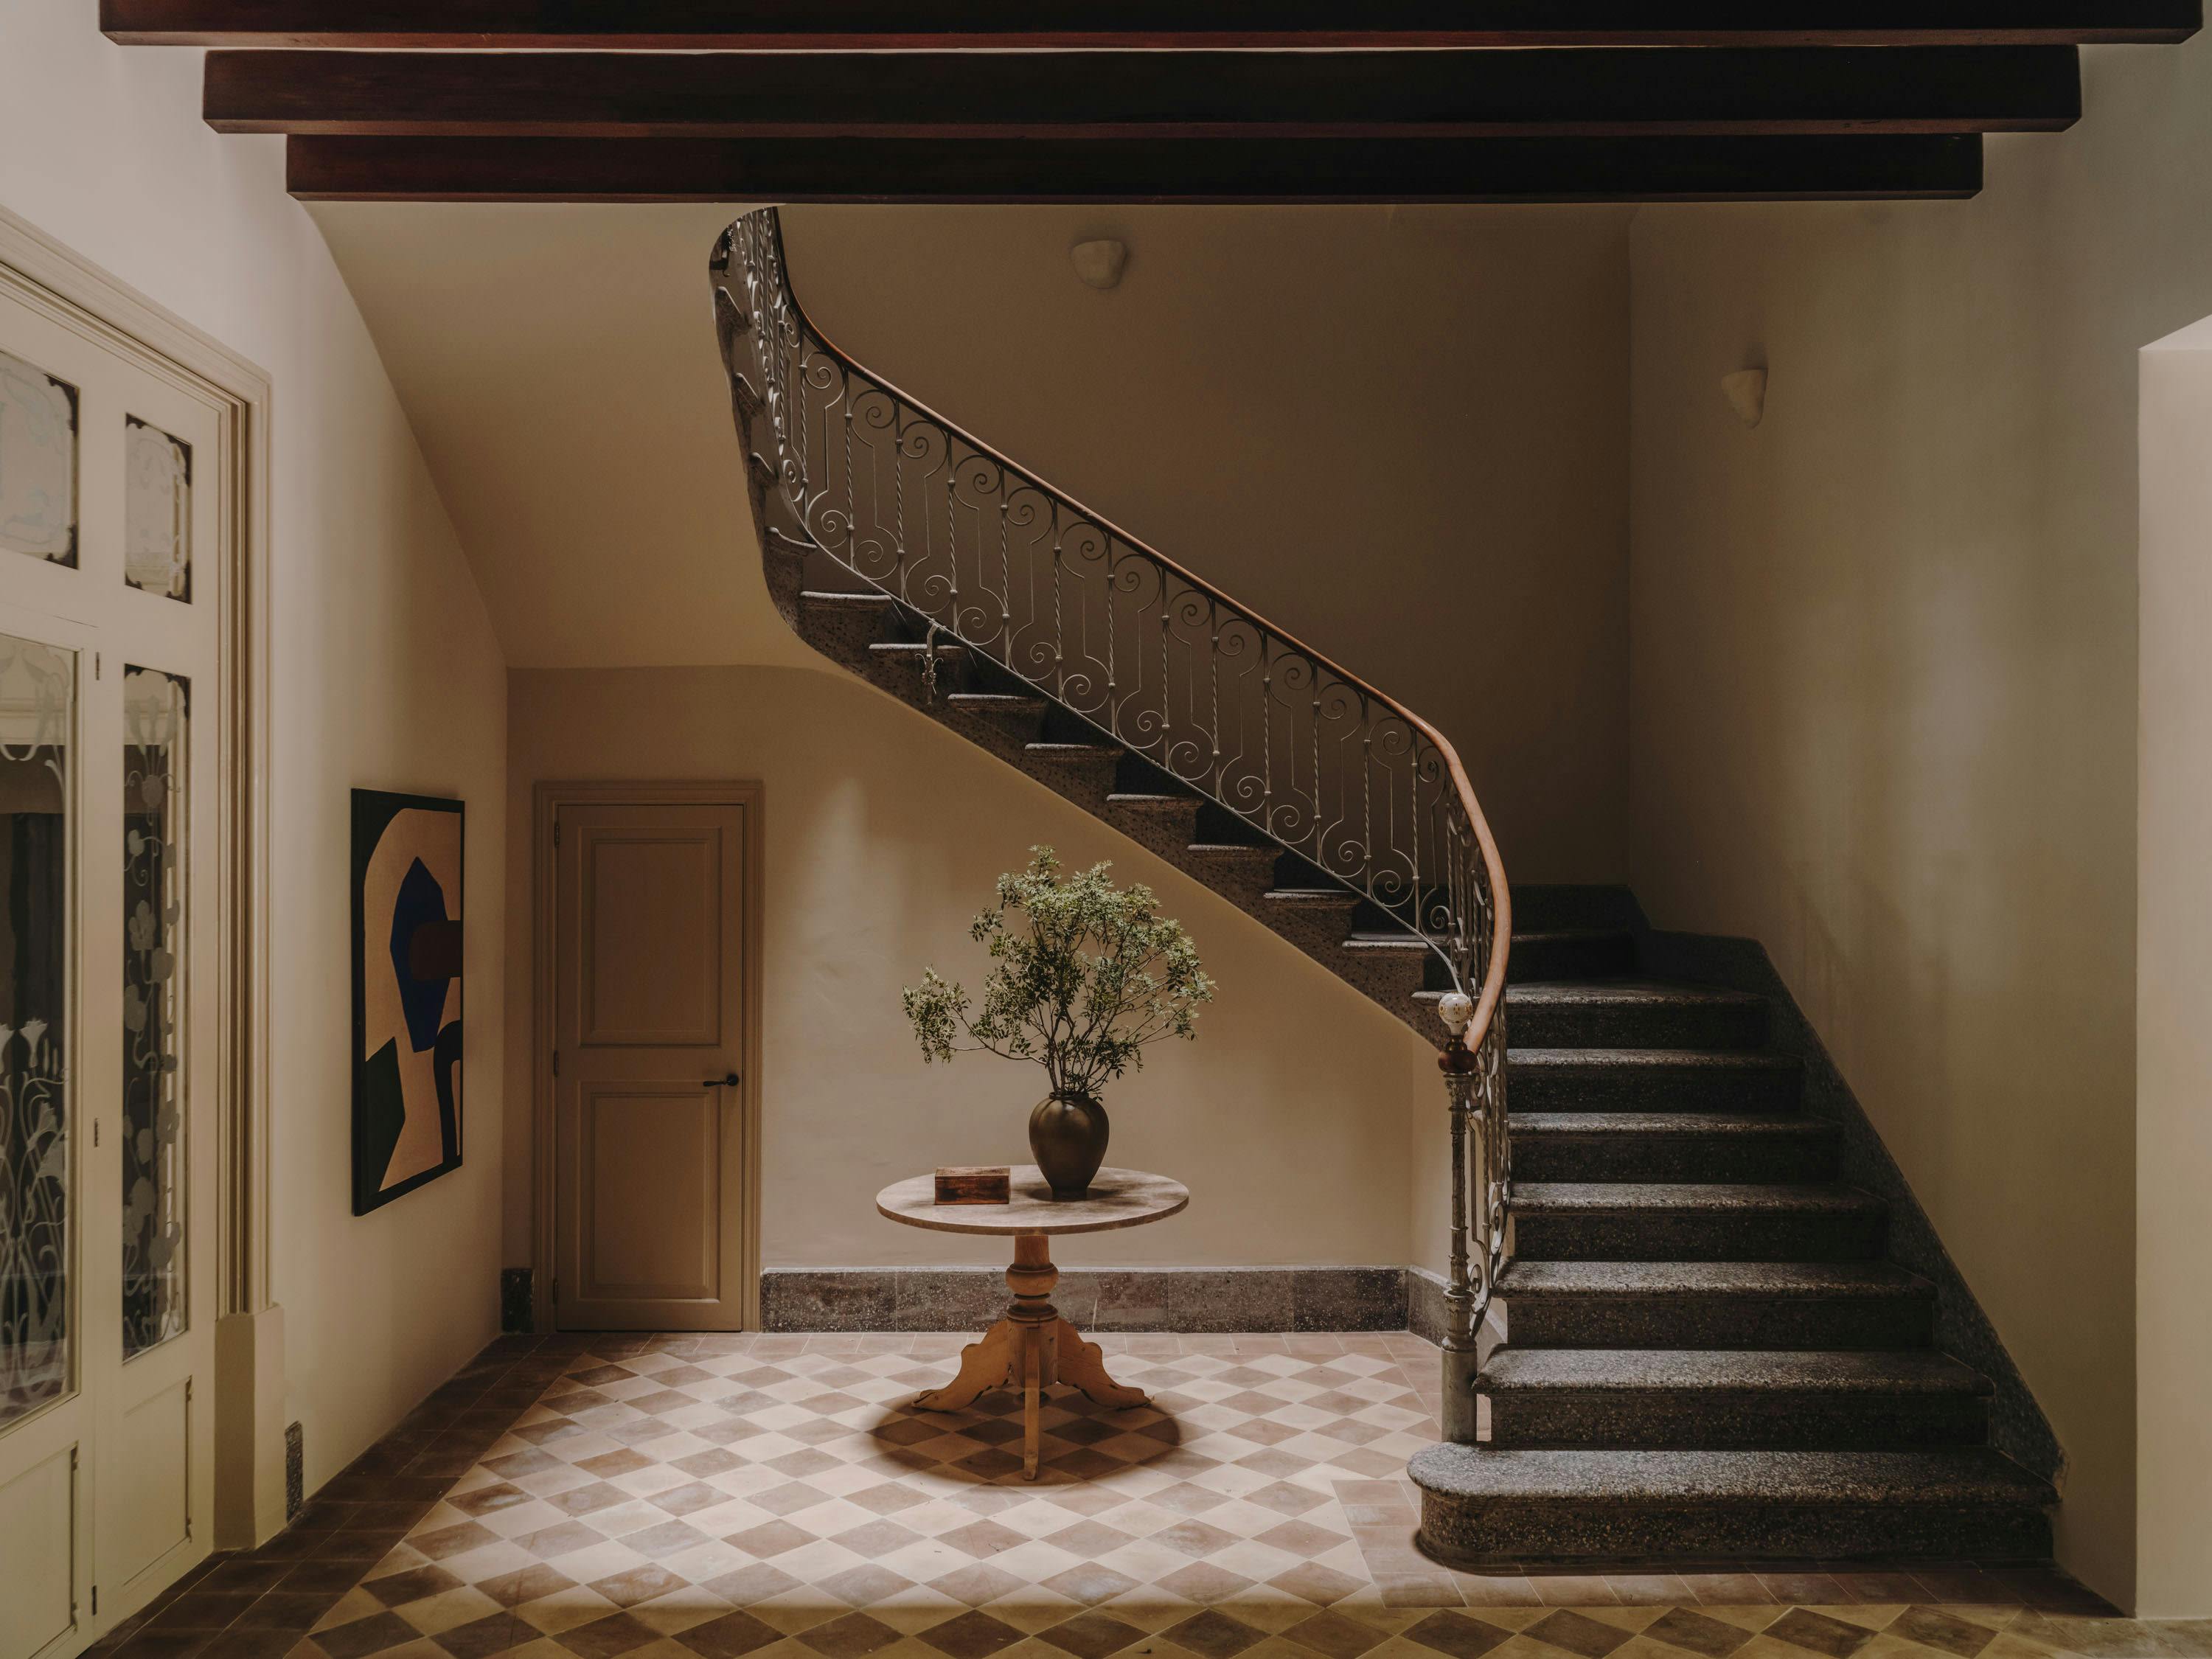 The image features a hallway with a staircase leading to a doorway. The staircase is made of metal and has a spiral design. The hallway is decorated with a potted plant placed on the floor near the bottom of the stairs. 

In the hallway, there is a vase on a table, which adds a touch of elegance to the space. Additionally, there are two pictures hanging on the wall, one on the left side and another on the right side of the hallway. The presence of these pictures and the potted plant create a cozy and inviting